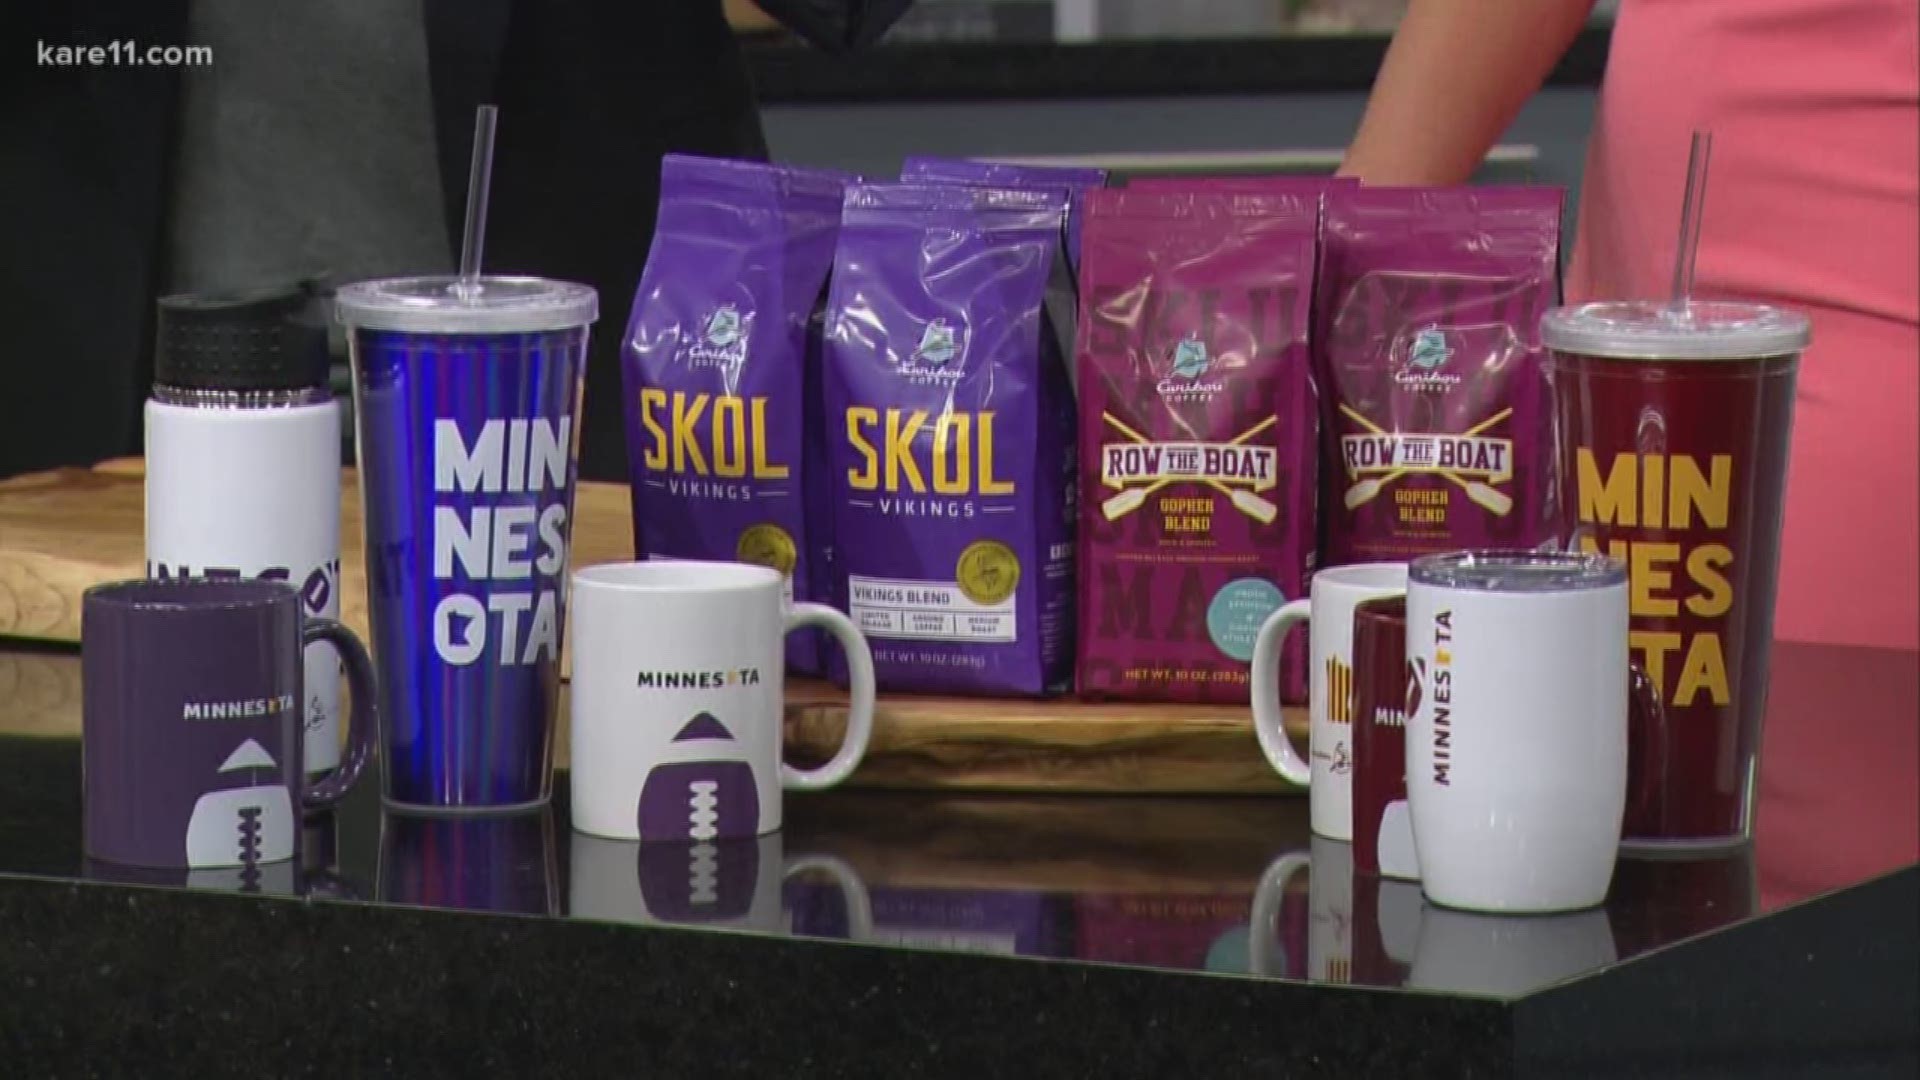 With football season approaching Minnesota-based Caribou Coffee is releasing new flavors dedicated to the Vikings and Gophers.